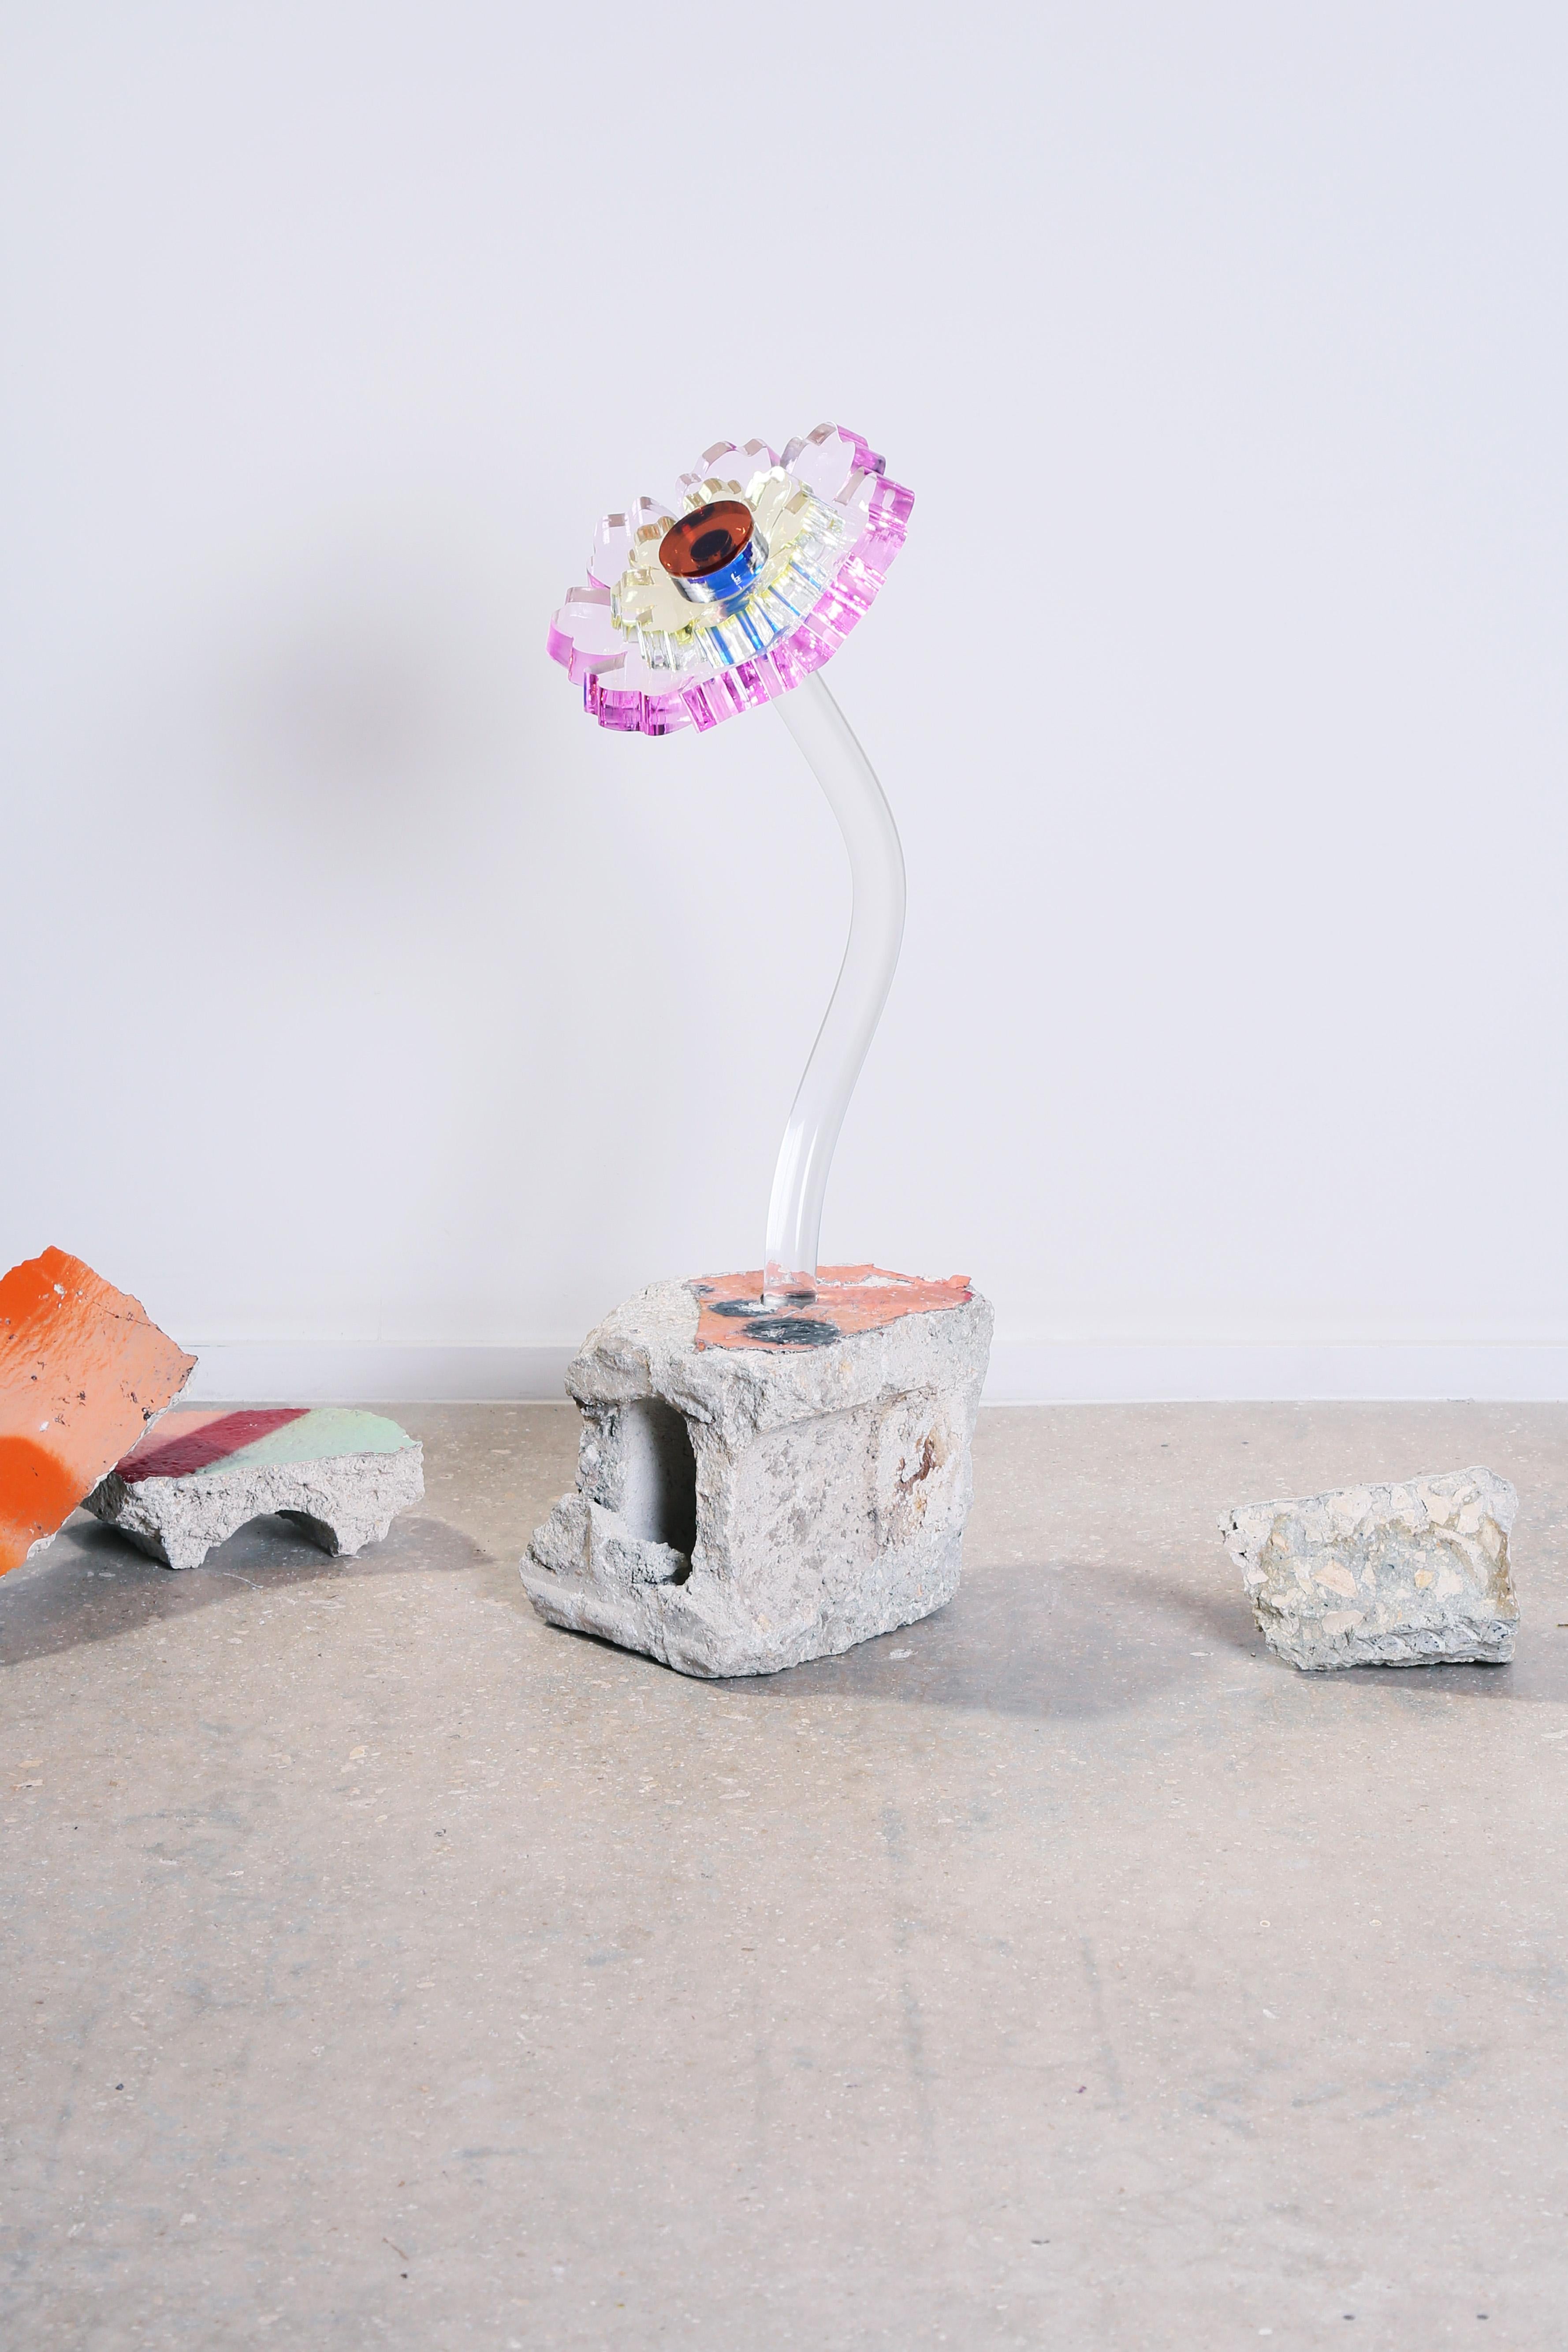 The flora sculptures are part of the Fossils series. Oversized acrylic flower sculptures are combined with repurposed painted concrete rubble from demolished buildings, allowing the artist to pay tribute to the past, while looking to the future. In